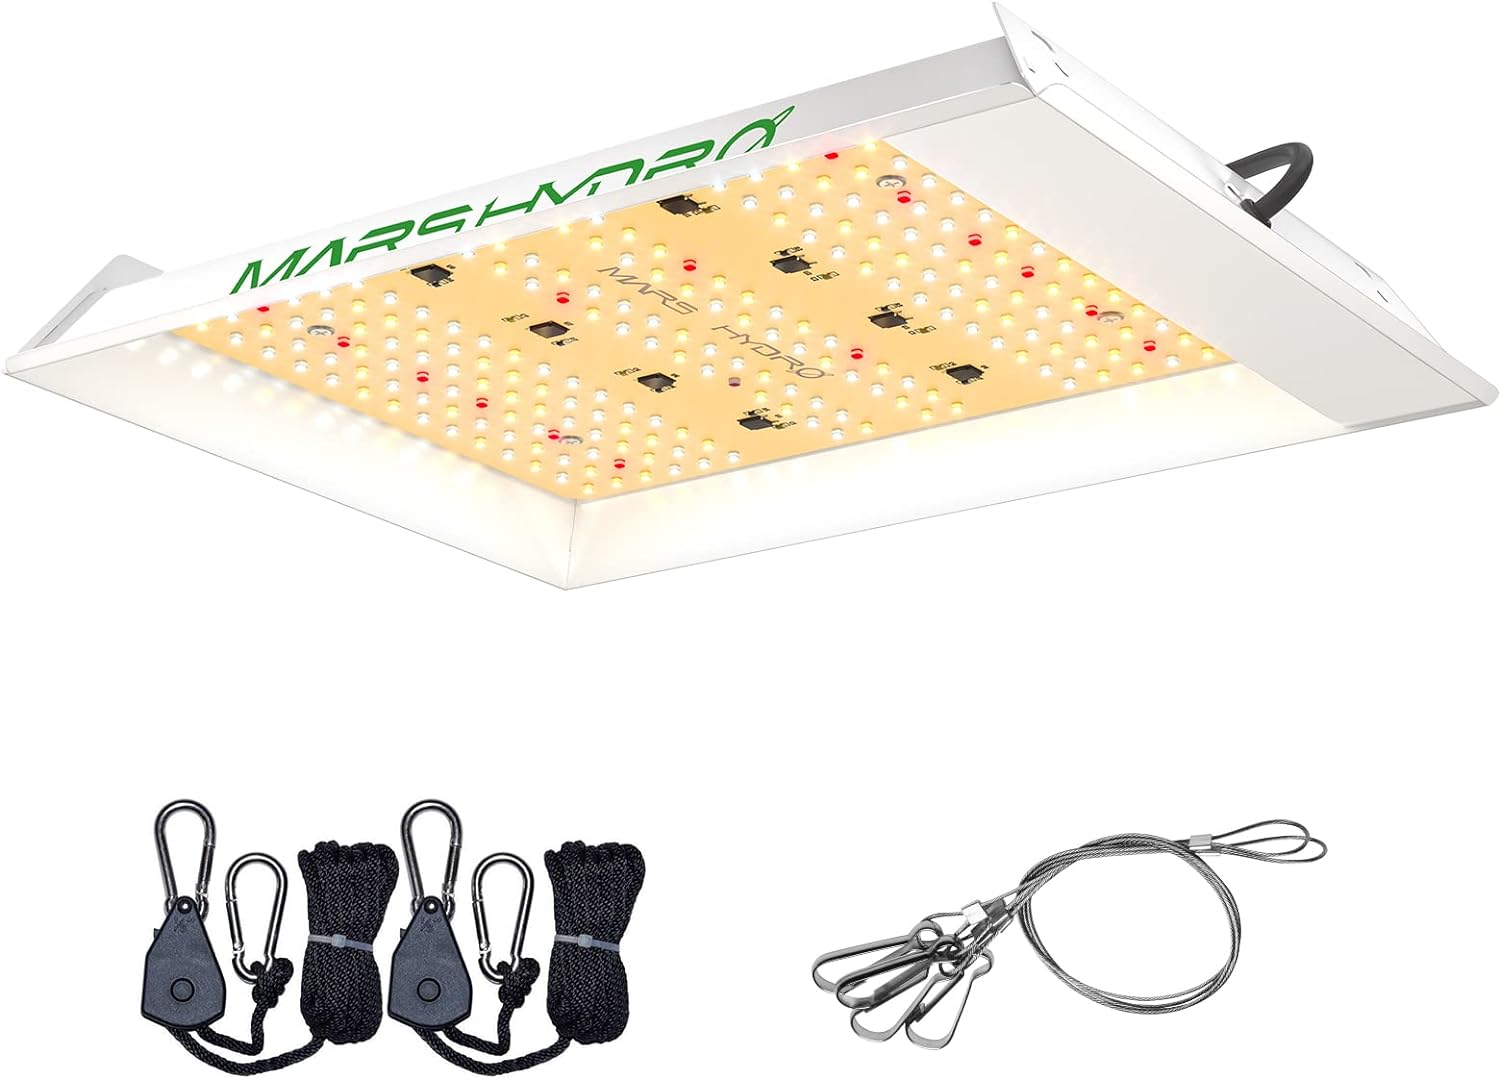 I have had this light for about two weeks now. The light appears well made and comes with the normal hardware for hanging plus a timer and temp/humidity sensor. I would have preferred those to be an option since I have them already and suspect most growers do as well. For first time growers it' a nice package deal.I have six 3-4 week old plants under it at about 18 and four under a 1500 watt LED and there is a noticeable difference in growth on the plants under the Mars Hydro. I recently purch